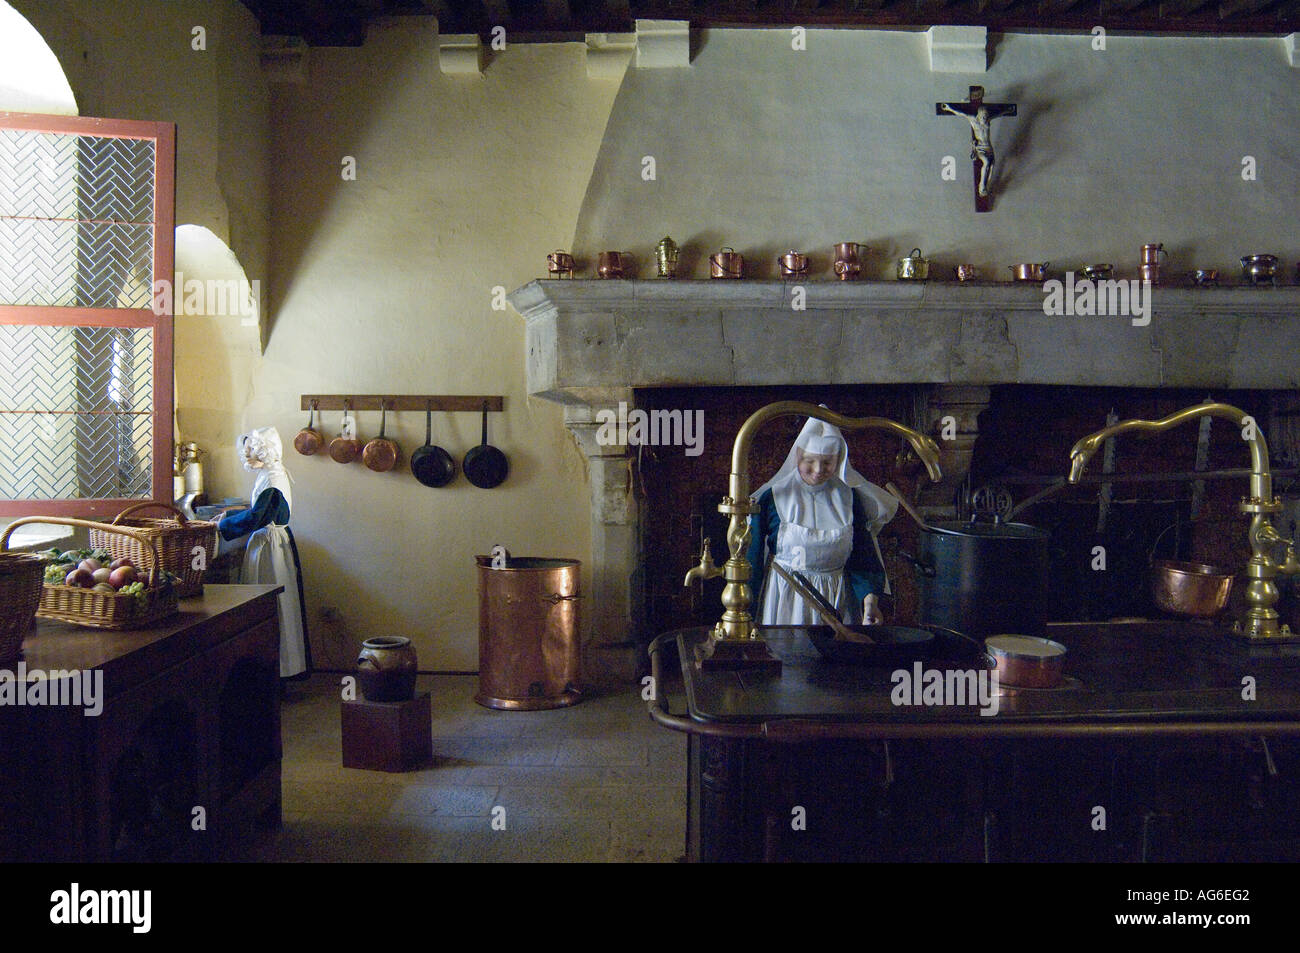 Kitchen tableau with nuns dressed in habit, Hospices de Beaune, Hotel Dieu, Burgundy, France Stock Photo